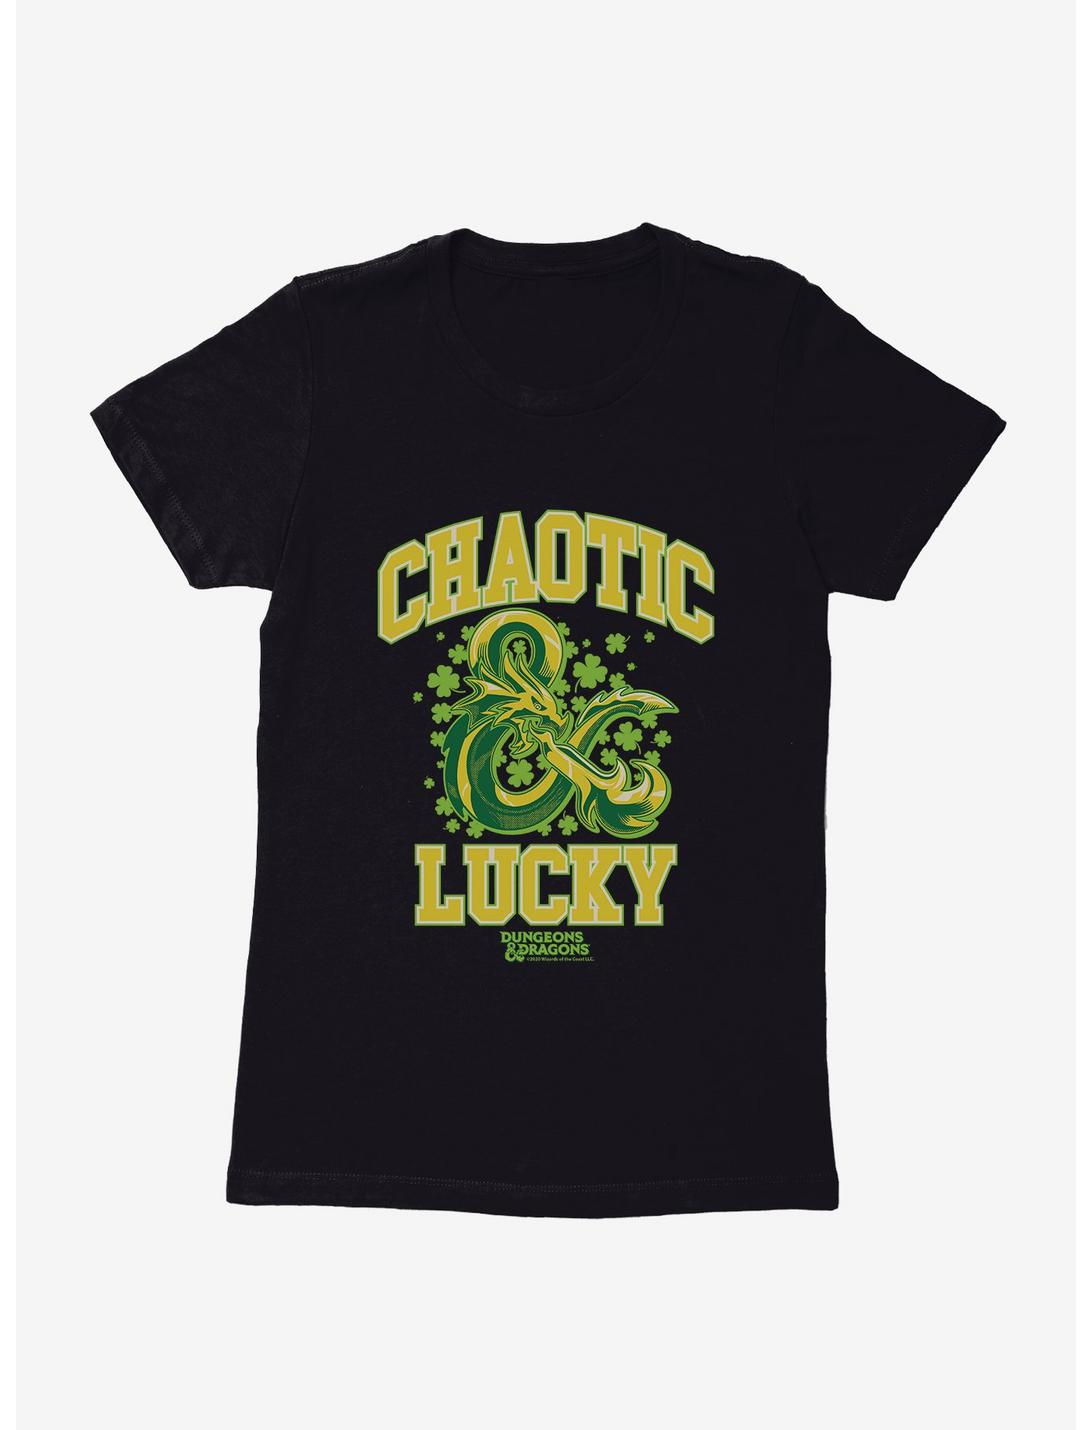 Dungeons & Dragons Chaotic And Lucky Womens T-Shirt, BLACK, hi-res